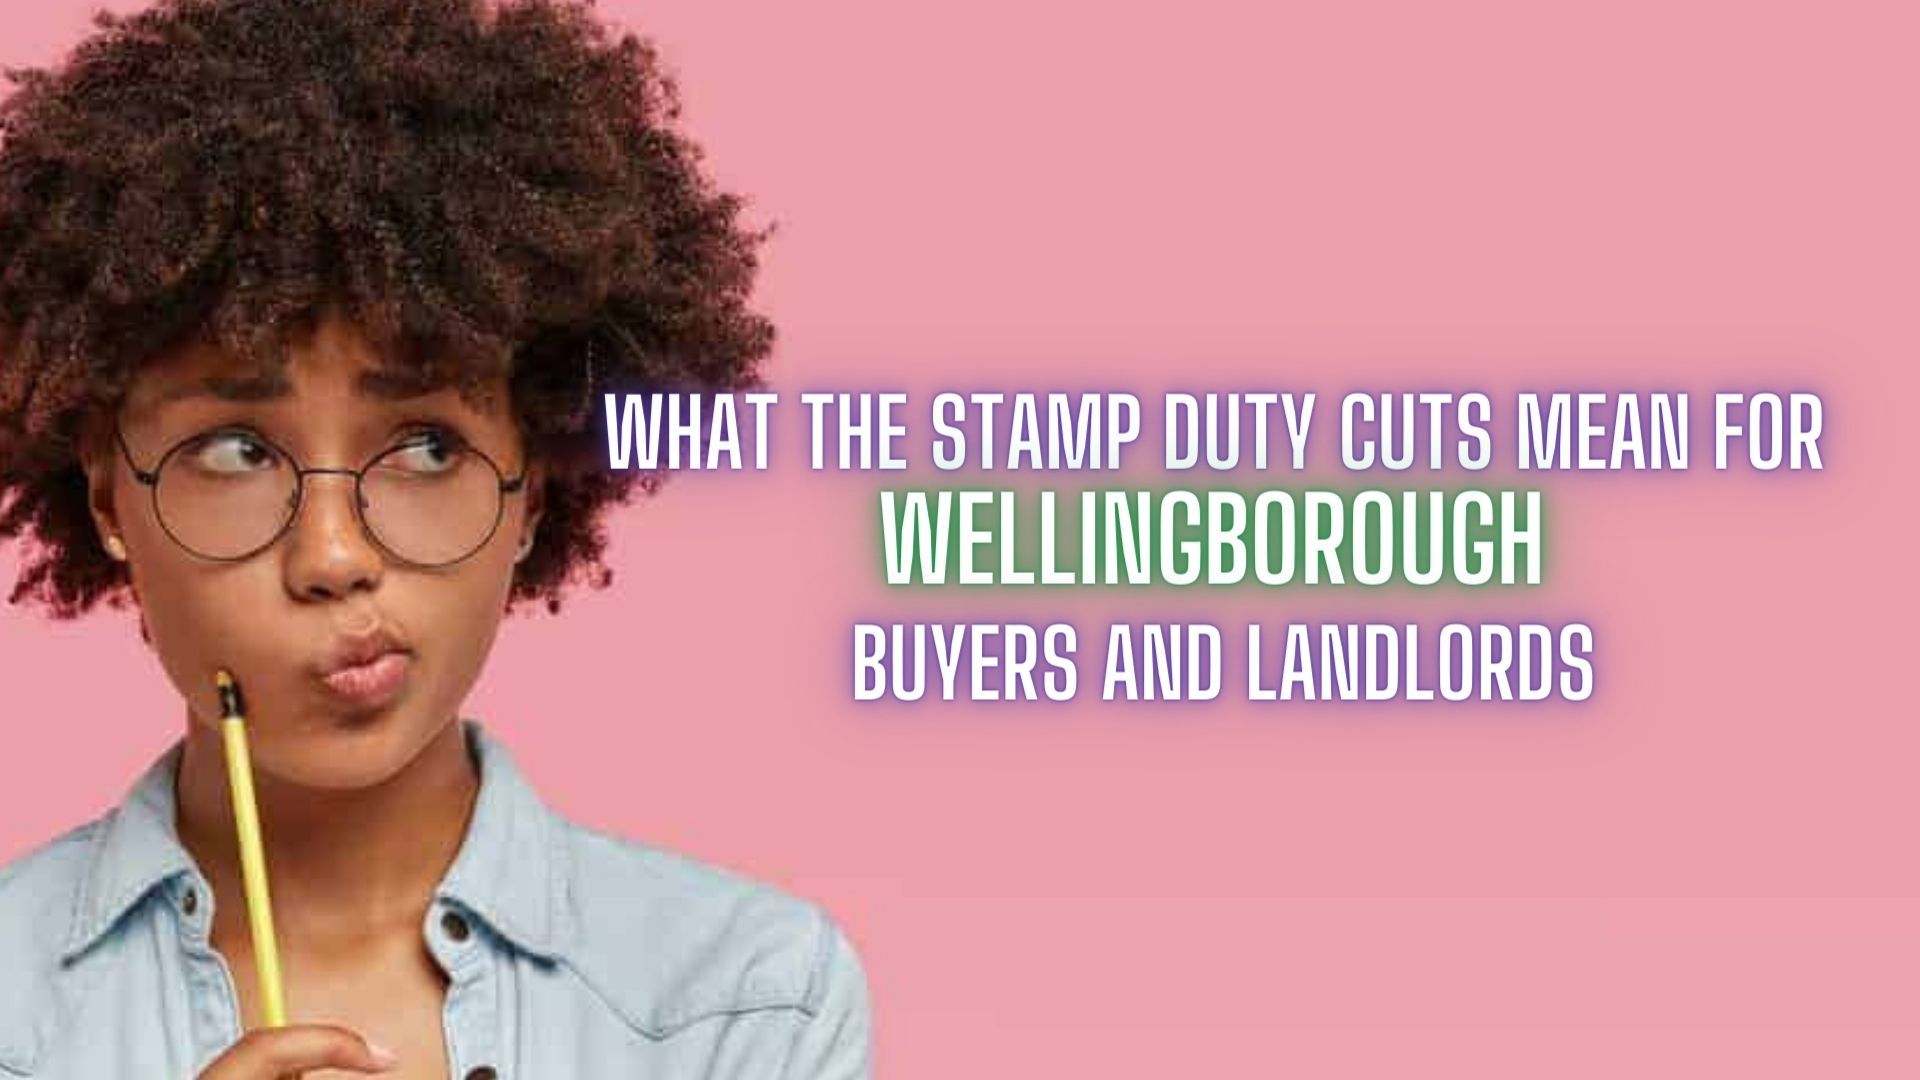 What The Stamp Duty Cuts Mean For Wellingborough Buyers And Landlords